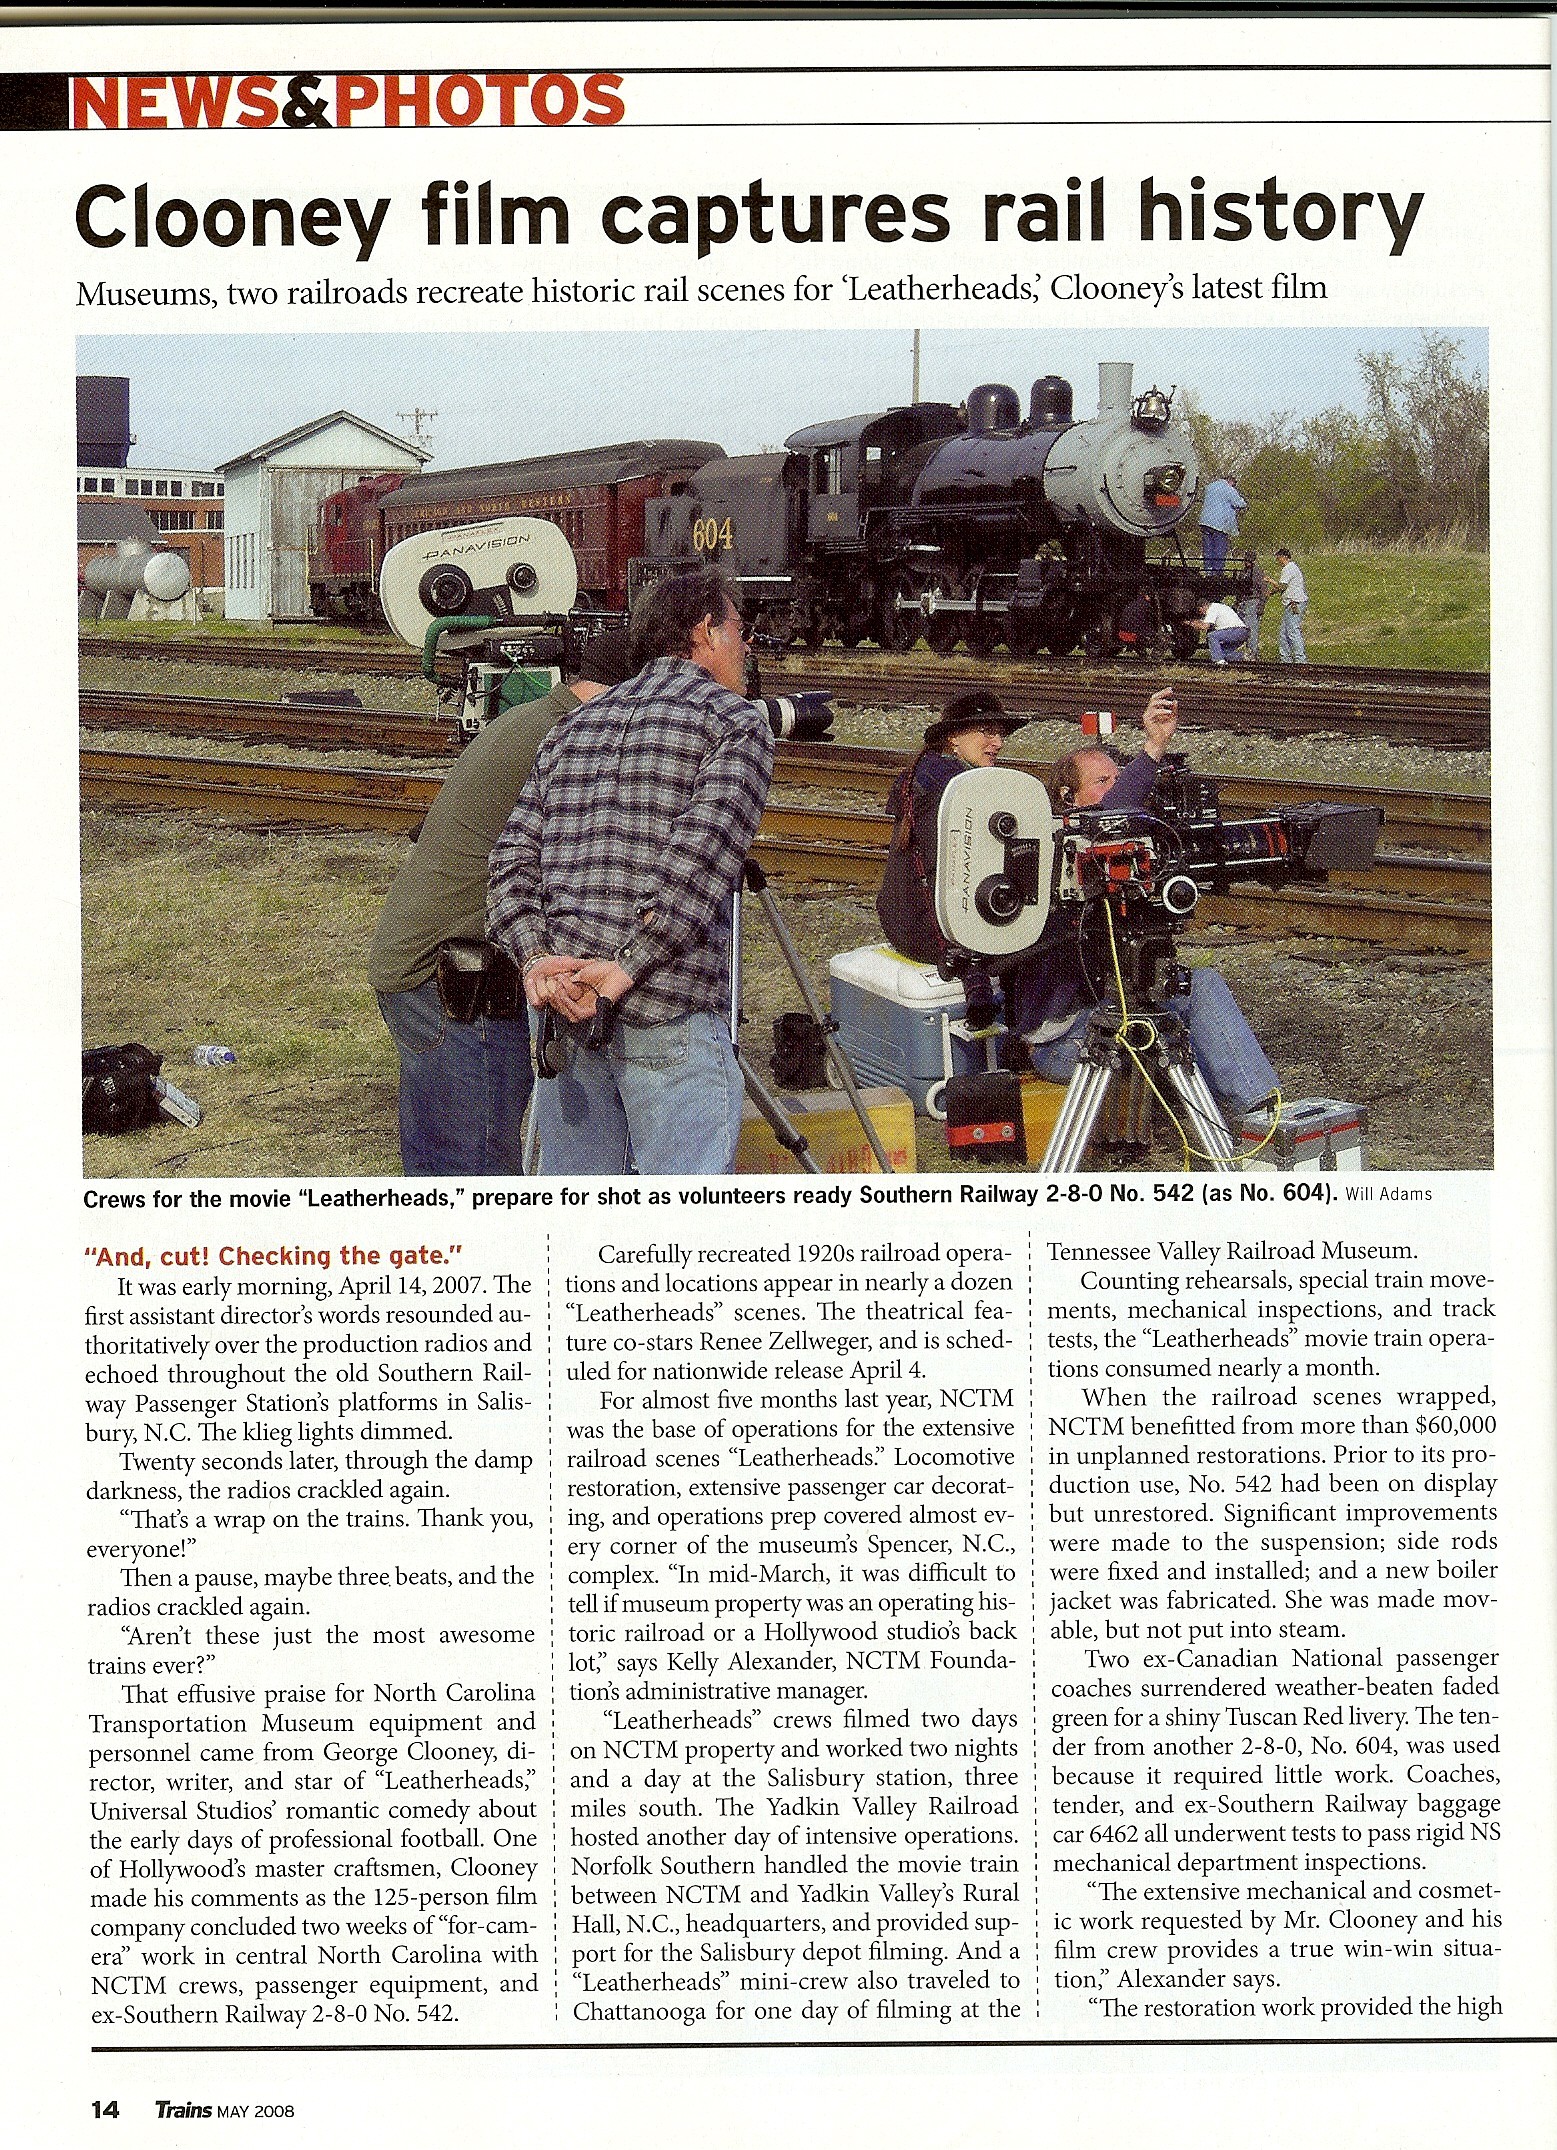 TRAINS Magazine, May 2008. Leatherheads' railroad scenes were a cooperative effort between film commissions, several Divisions of NS, Yadkin Valley RR, and NCTM. Details here.